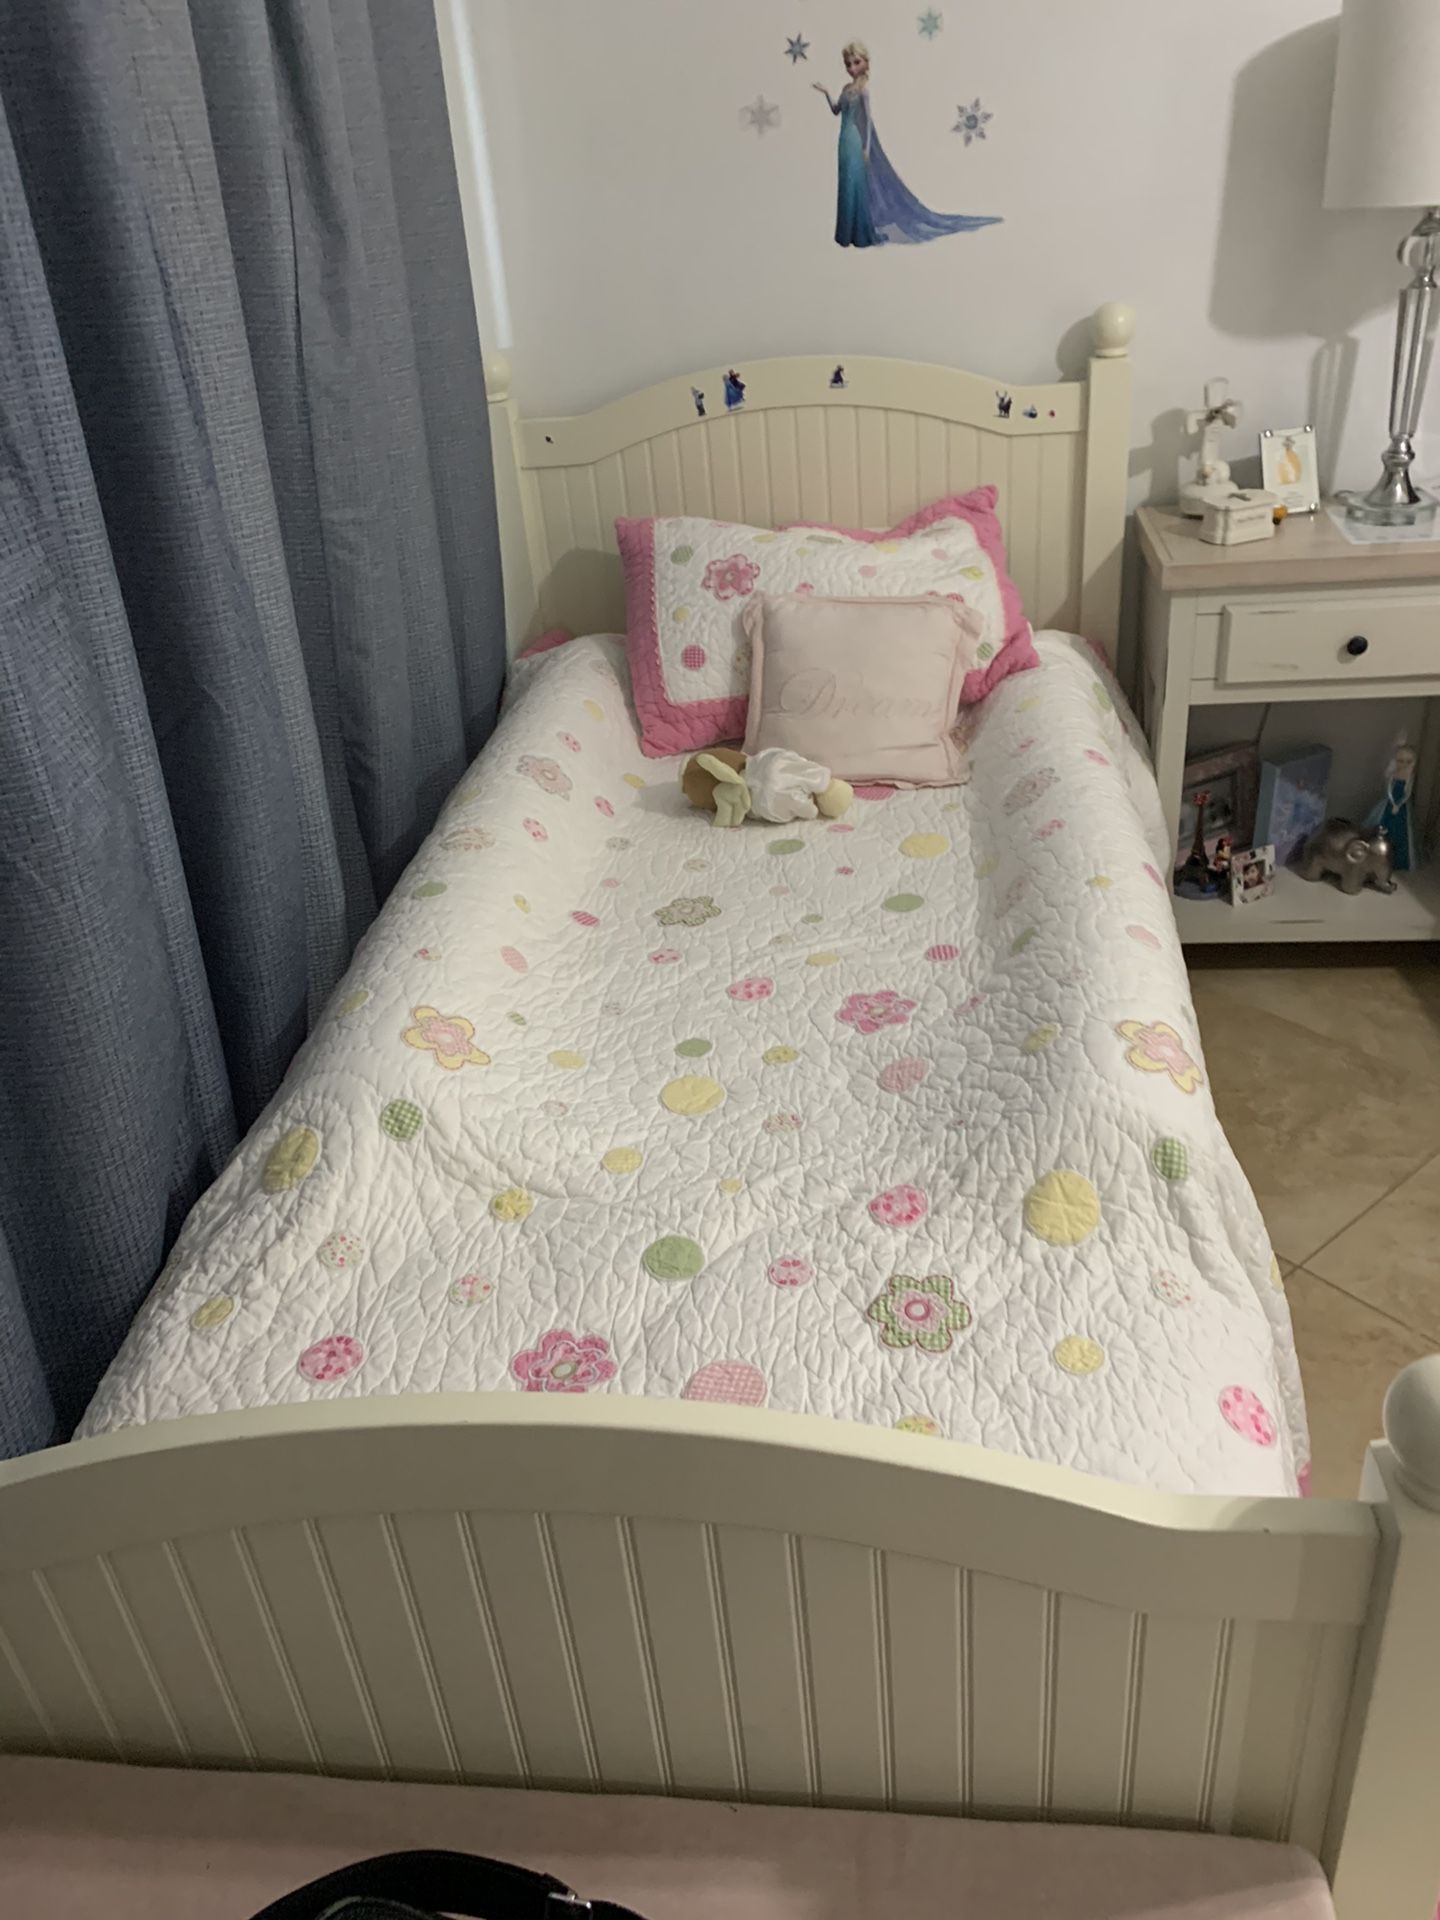 FREE kids twin bed with sheets and covers